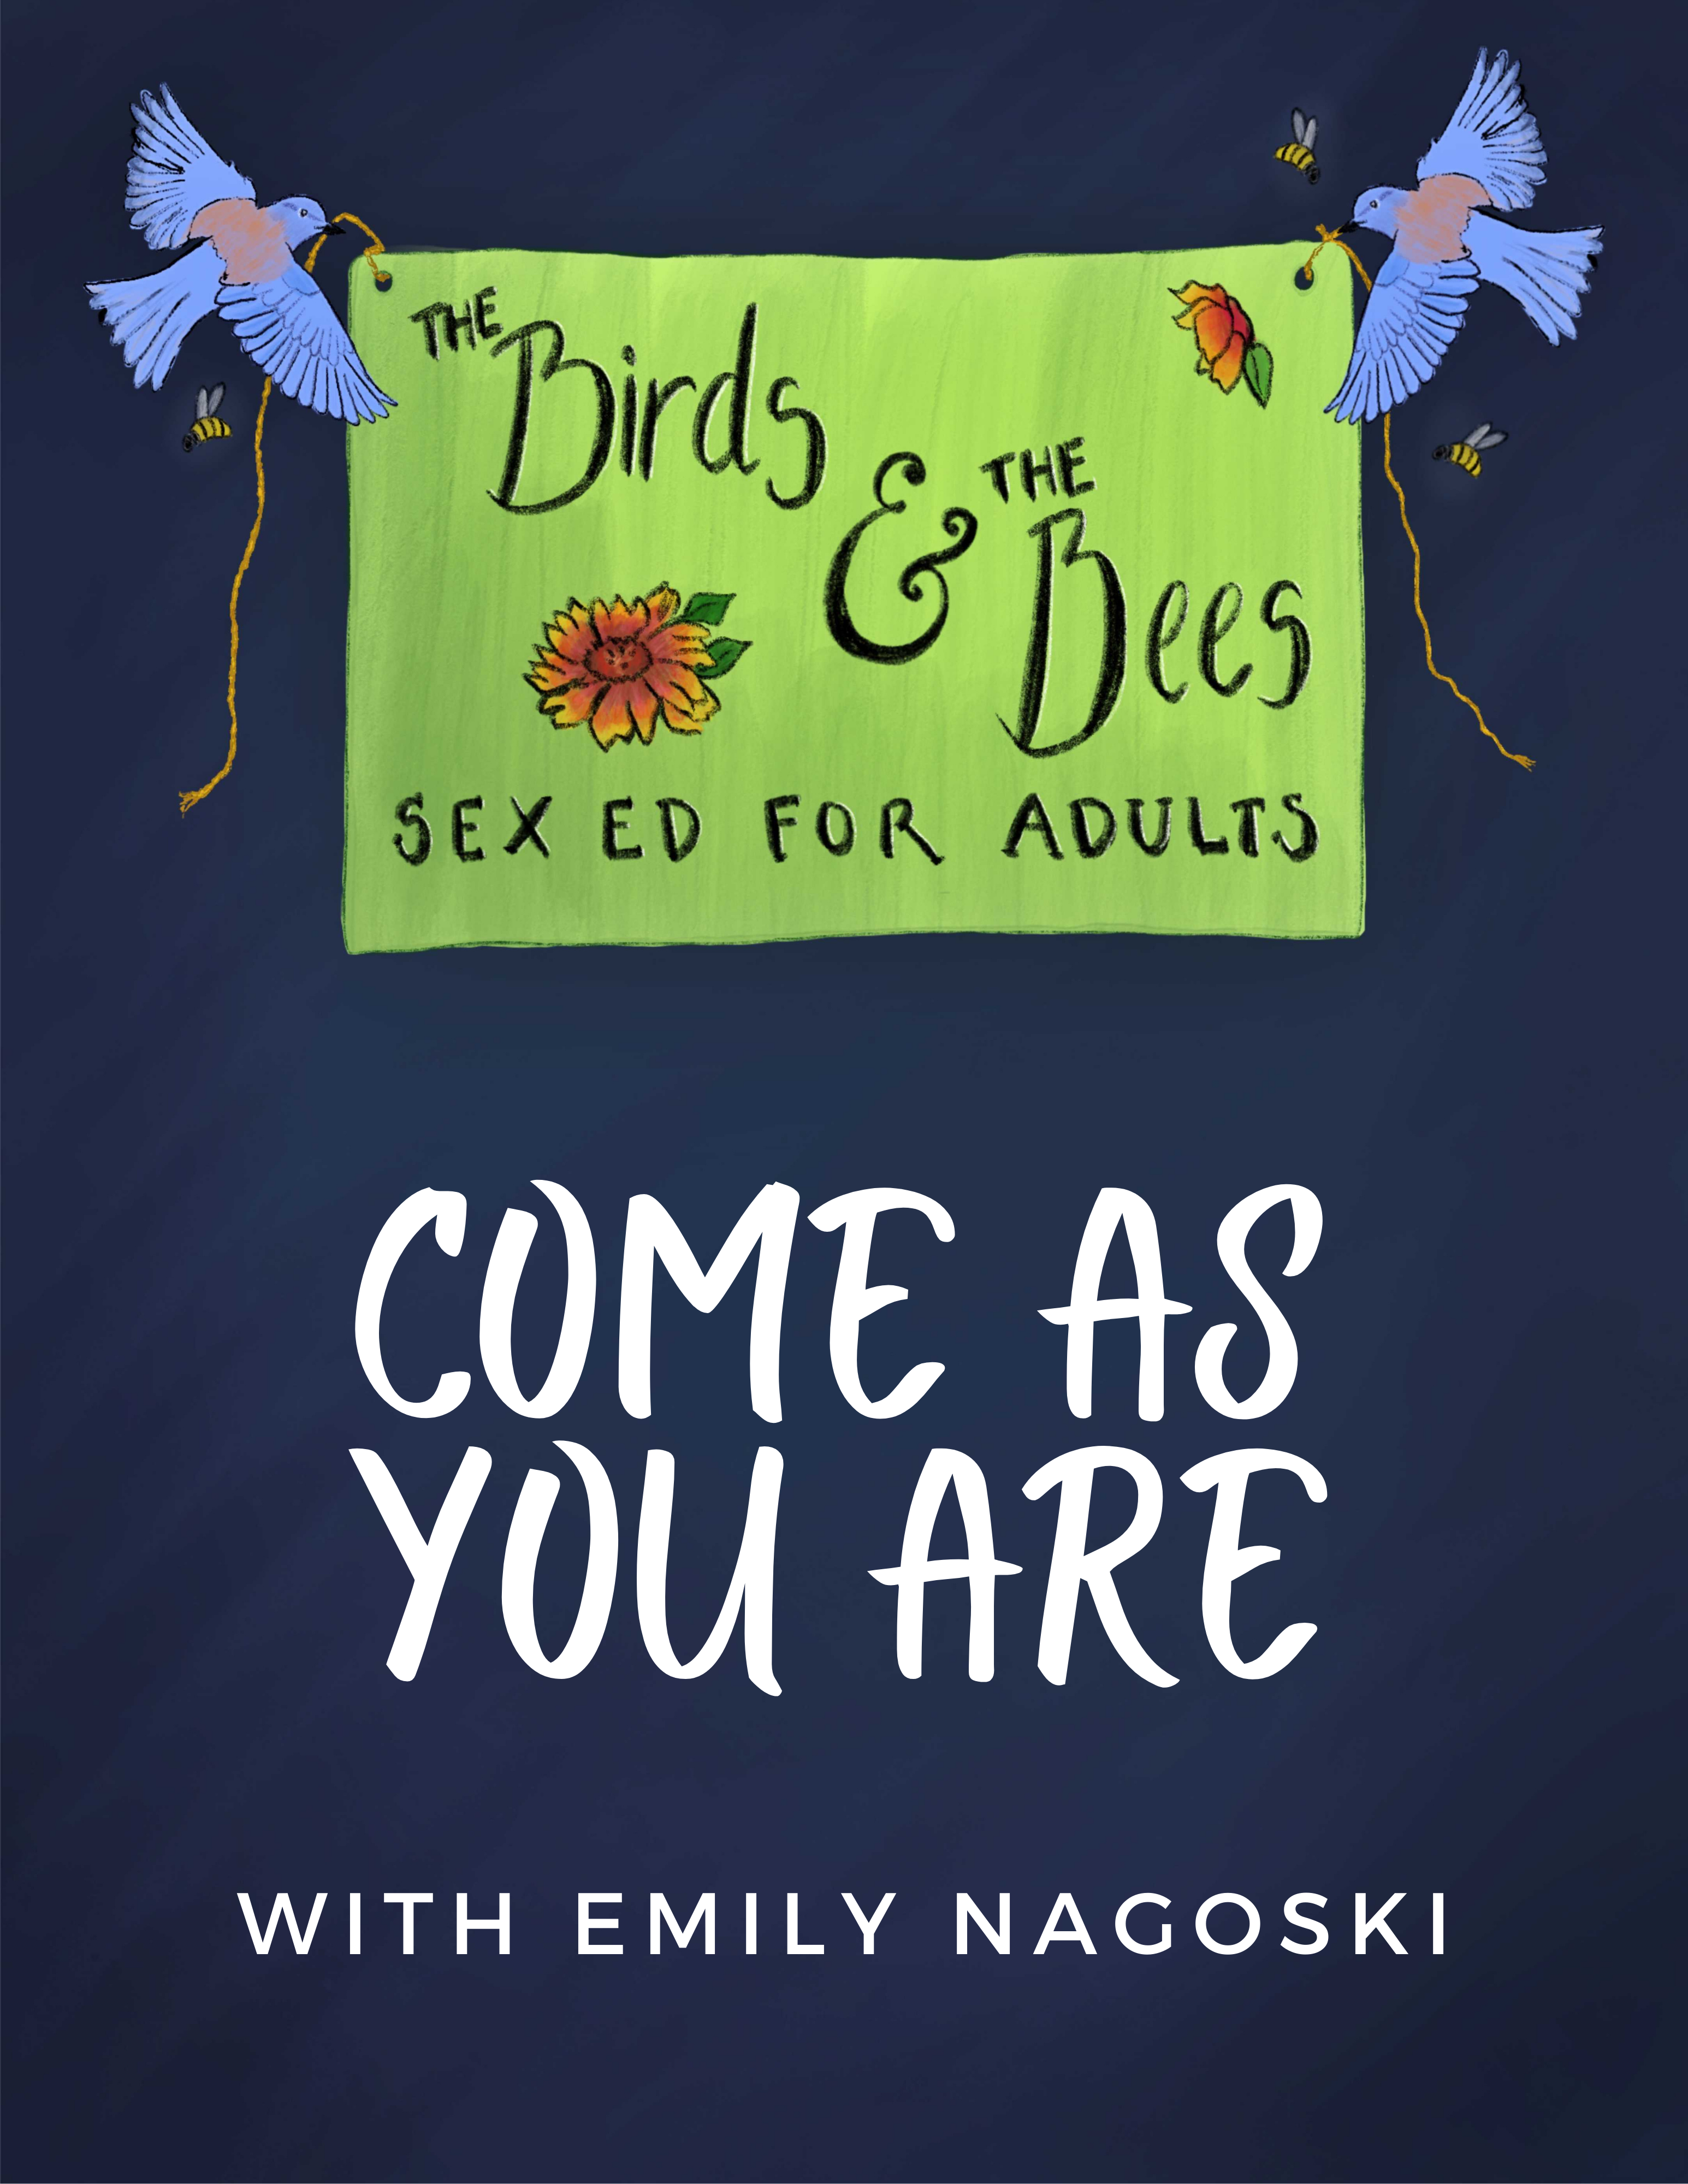 Two bluebirds are holding a banner surrounded by bees. The banner has two red sunflowers on it, and reads "The Birds and the Bees: Sex Ed for Adults." Below the banner are the words, Come As You Are with Emily Nagoski.